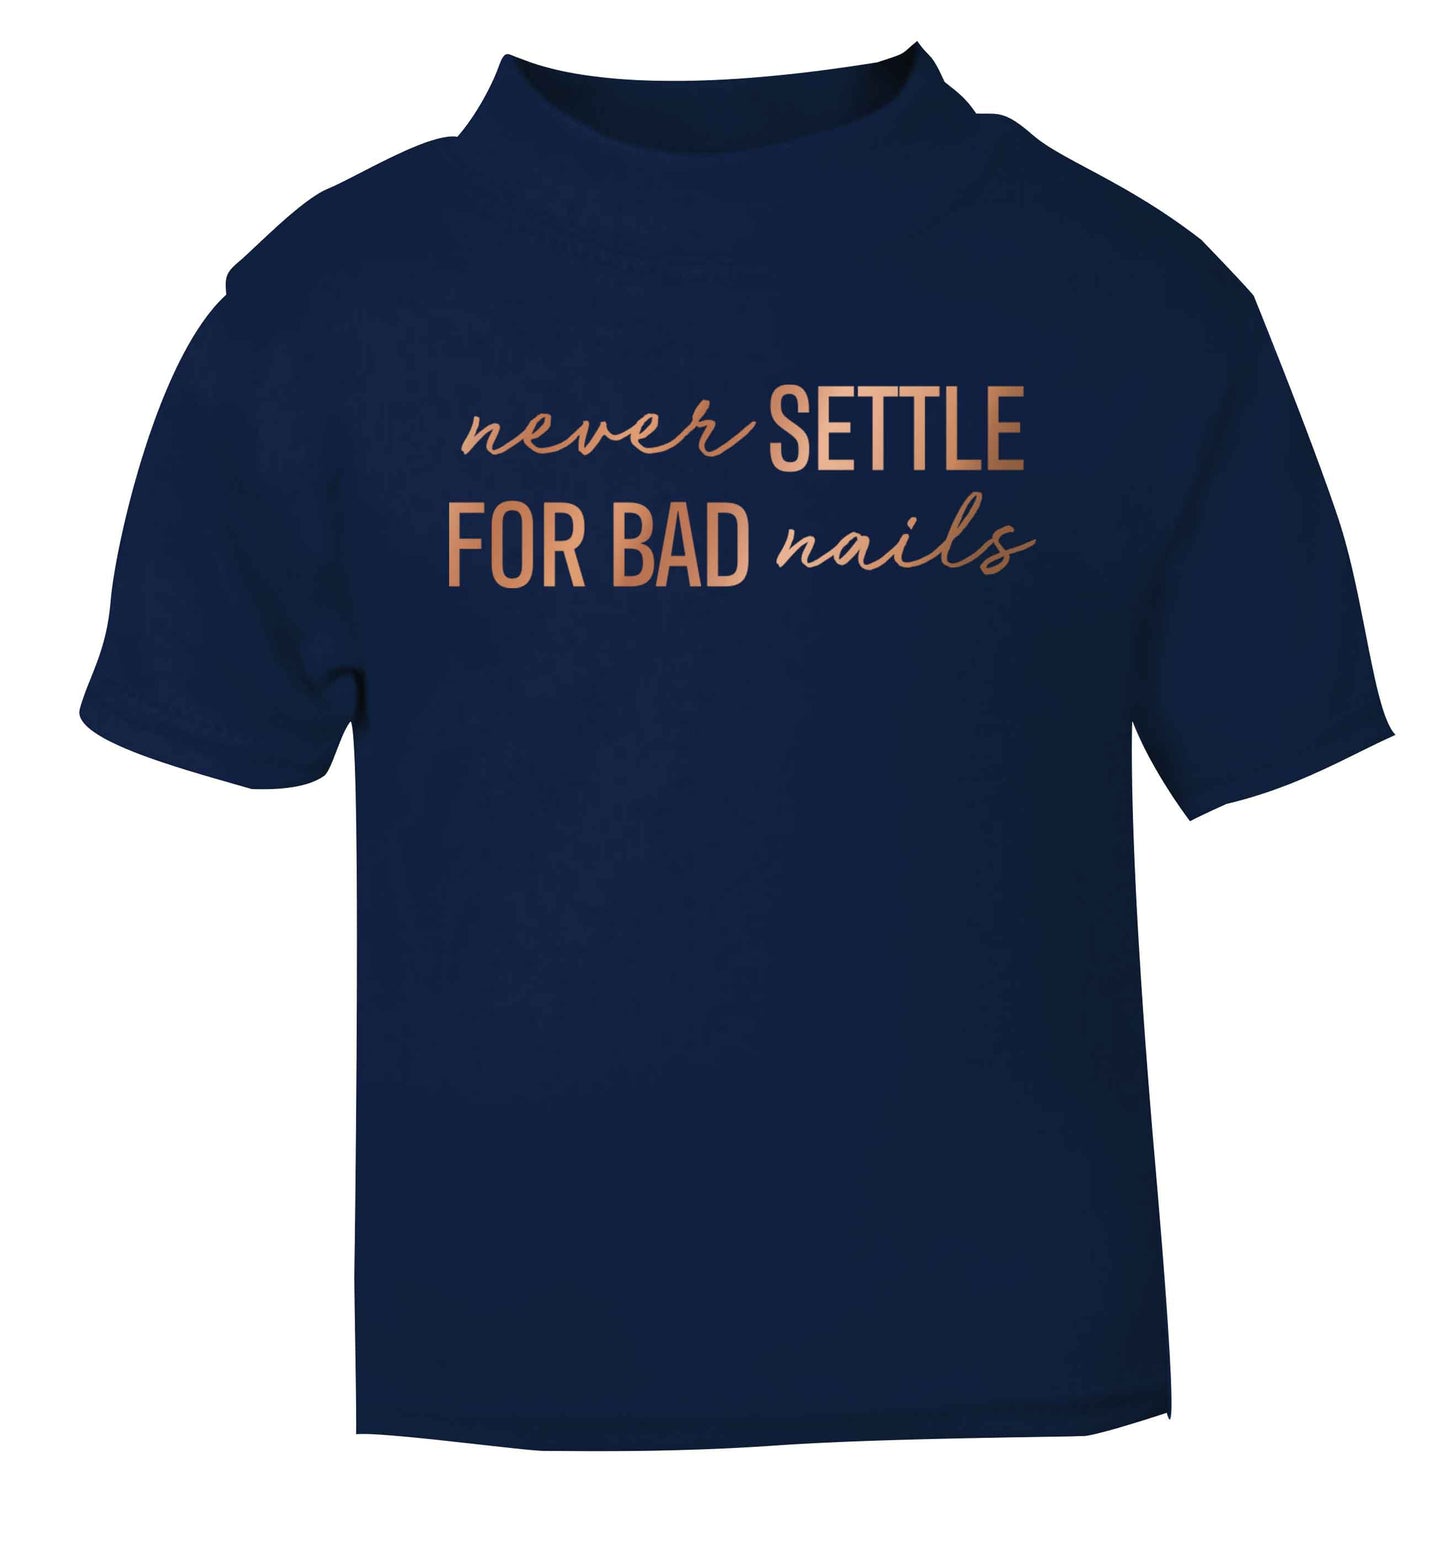 Never settle for bad nails - rose gold navy baby toddler Tshirt 2 Years